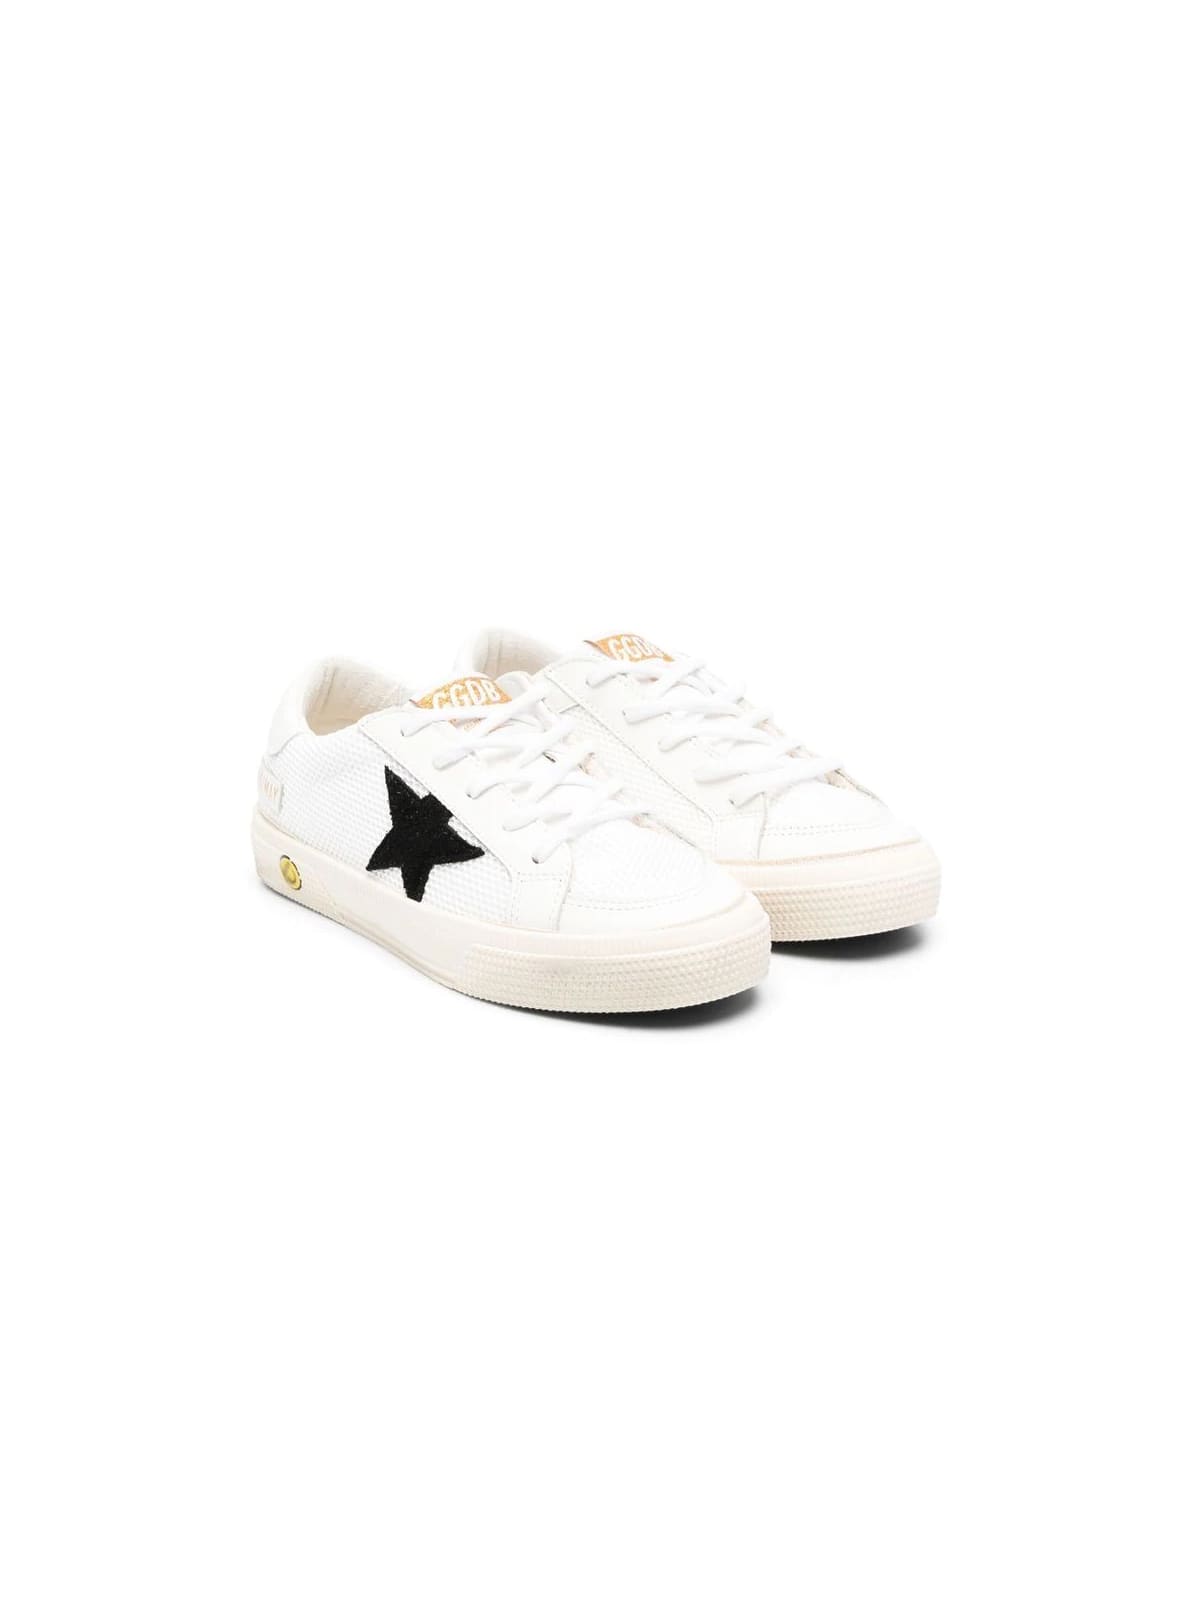 GOLDEN GOOSE MAY NET UPPER LEATHER TOE AND HEEL SUEDE STAR